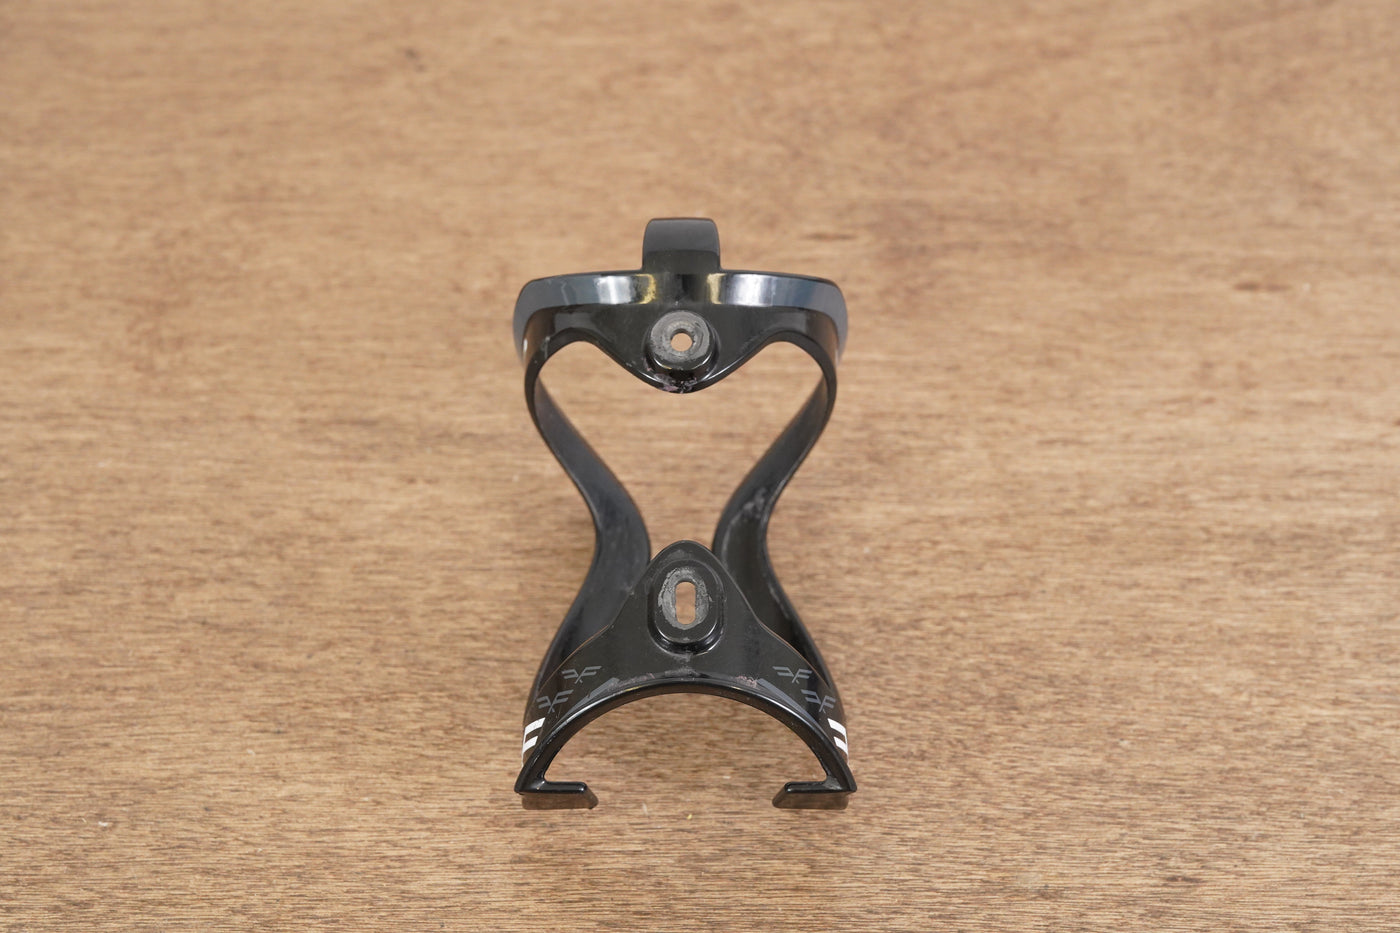 (1) Forte Corsa Water Bottle Cage 40g